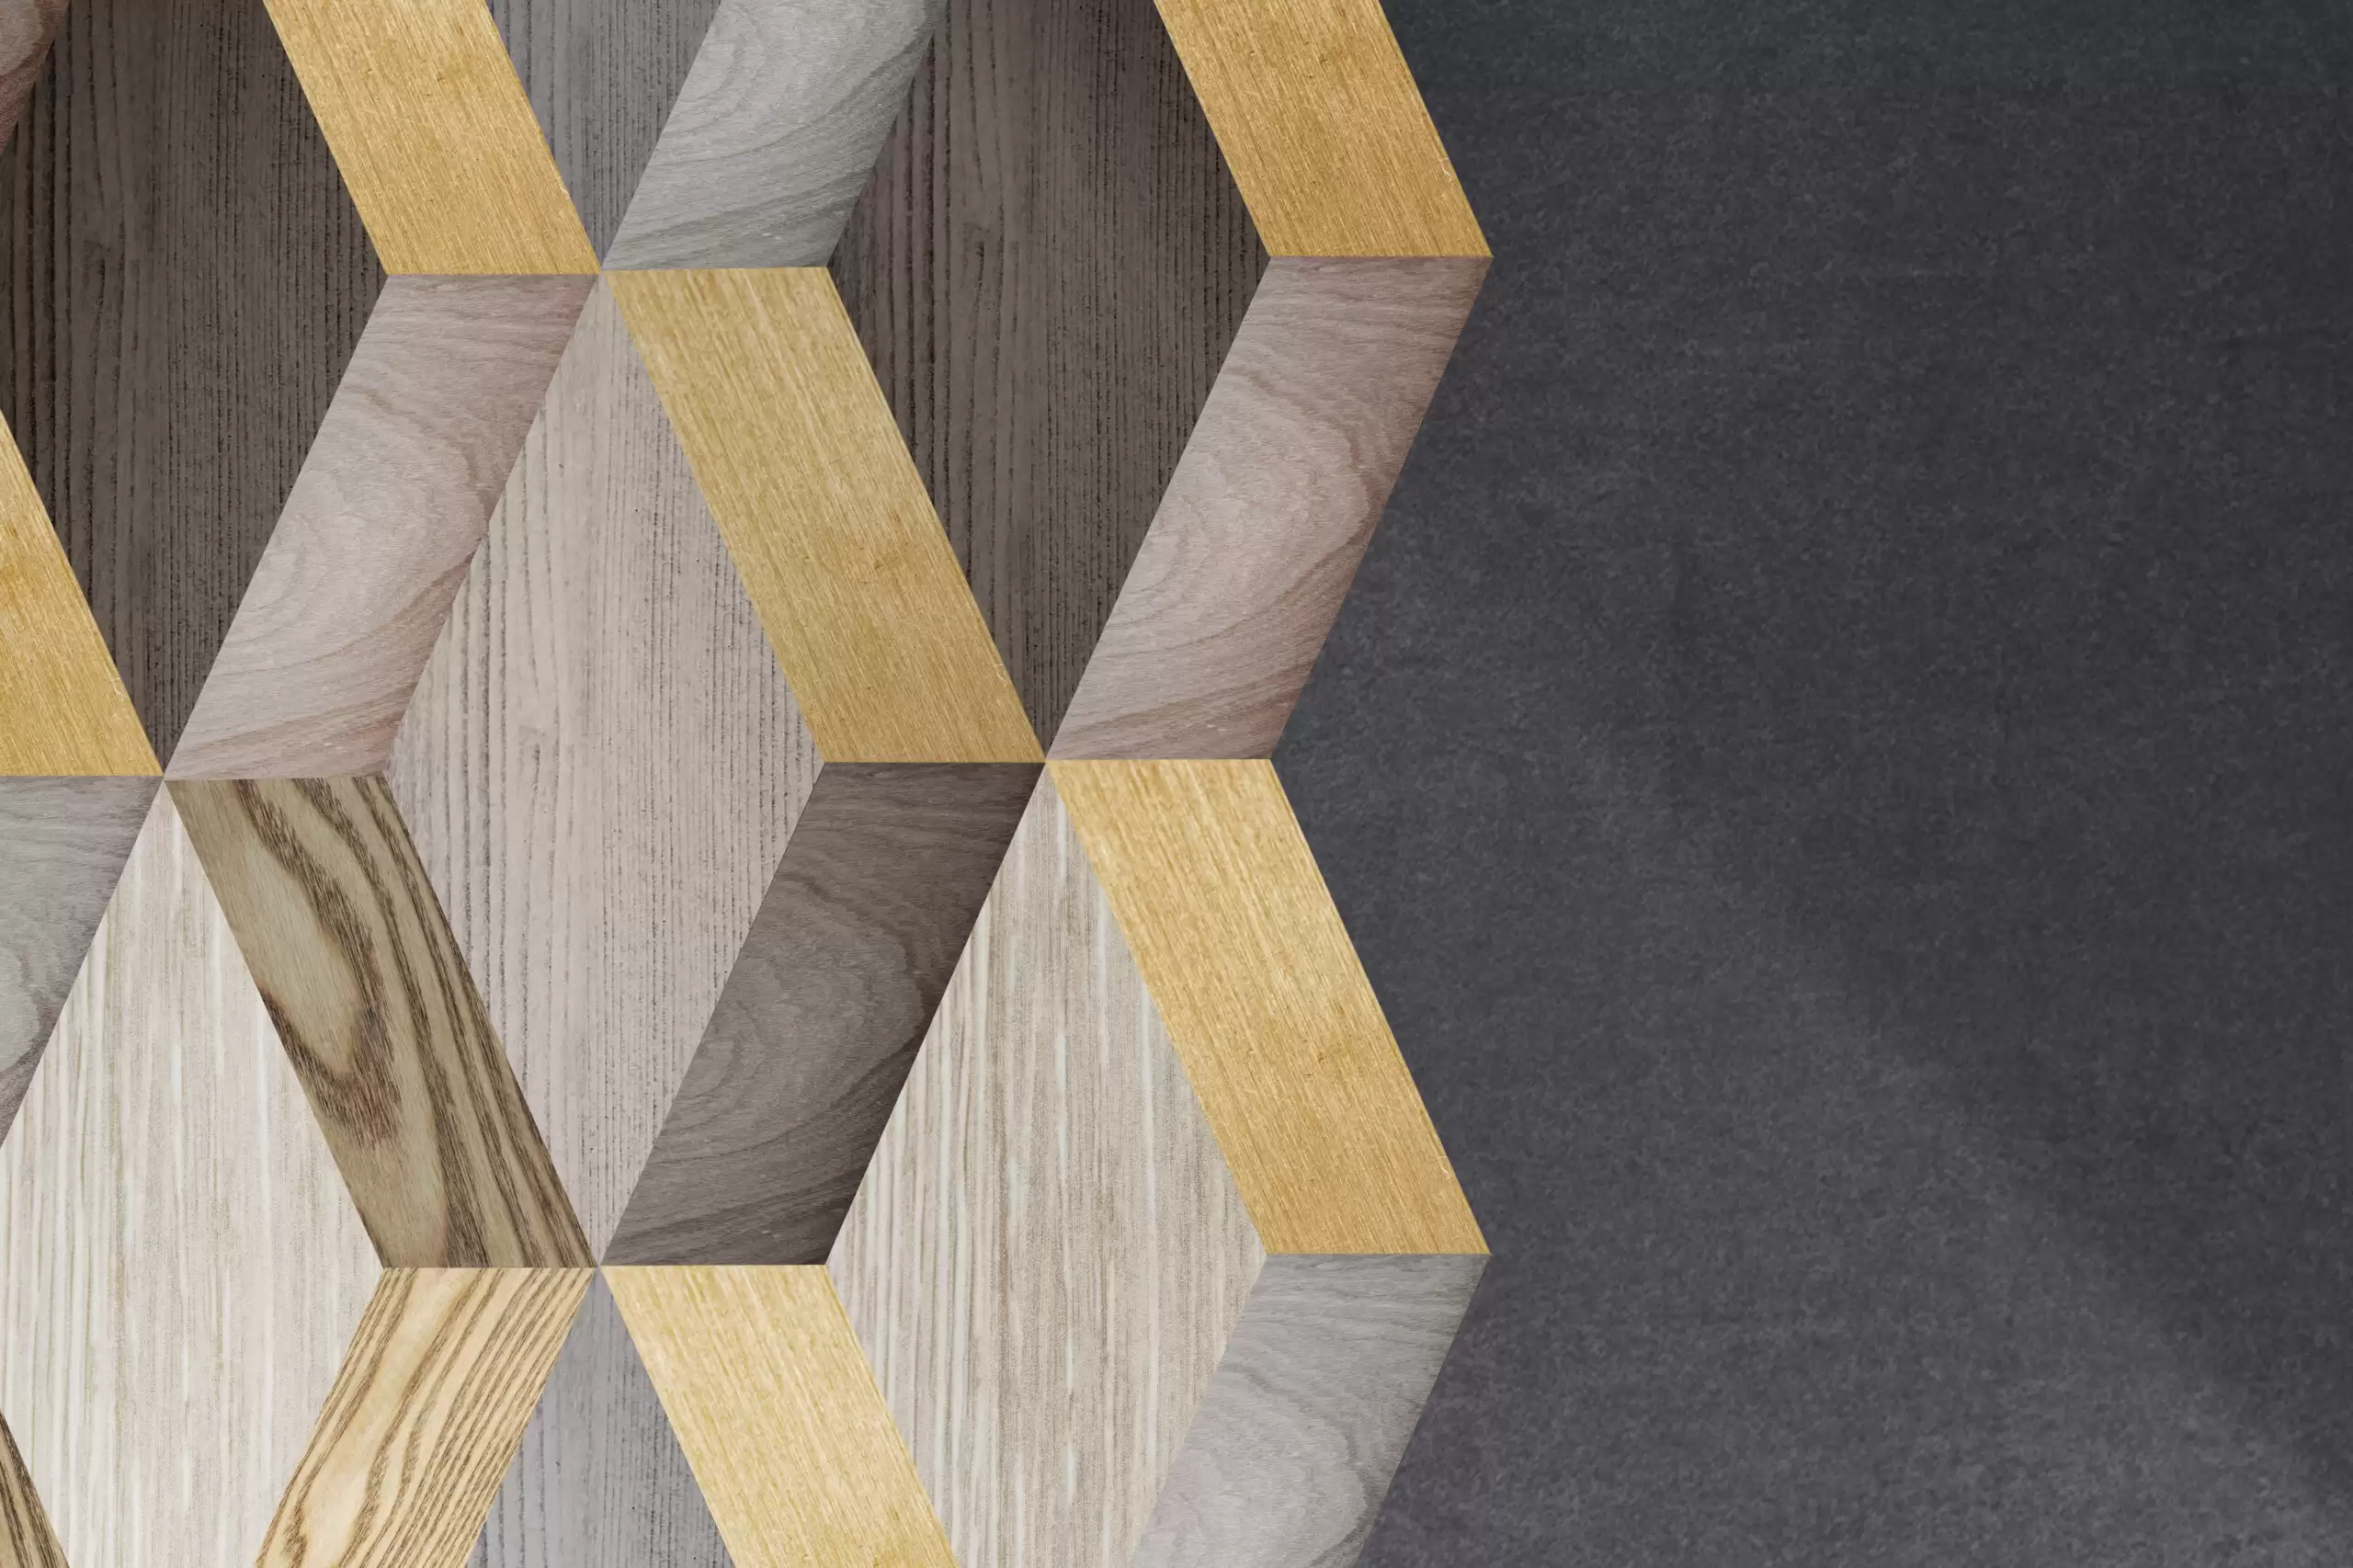 Som Wallcoverings | Som Wallcoverings Sets Trends with its New Collection